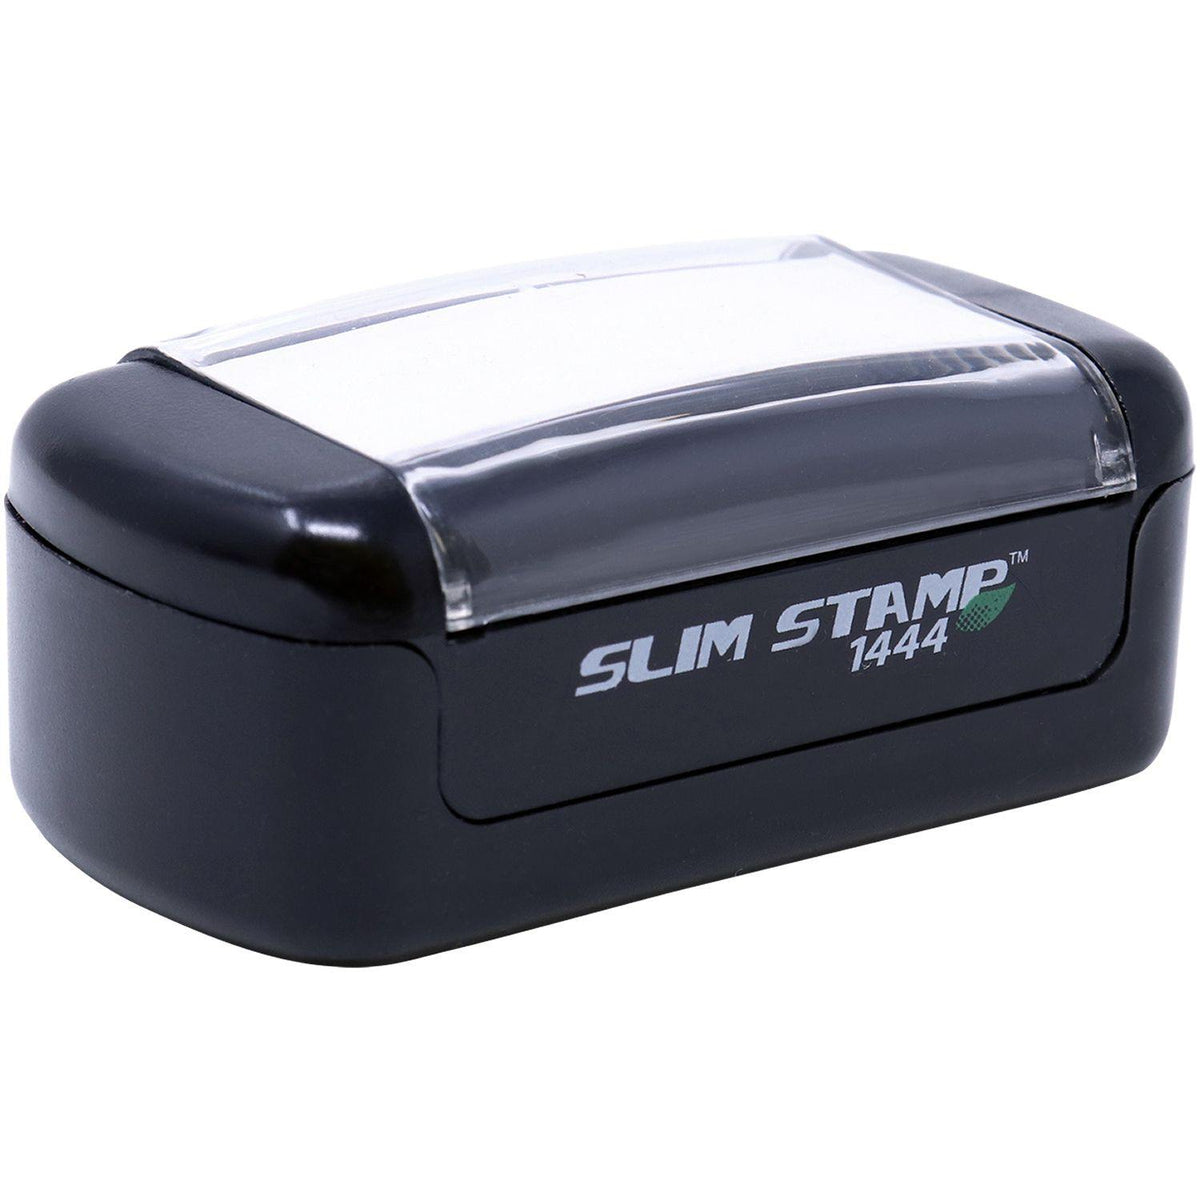 Alt View of Slim Pre Inked COD Stamp Mount Angle